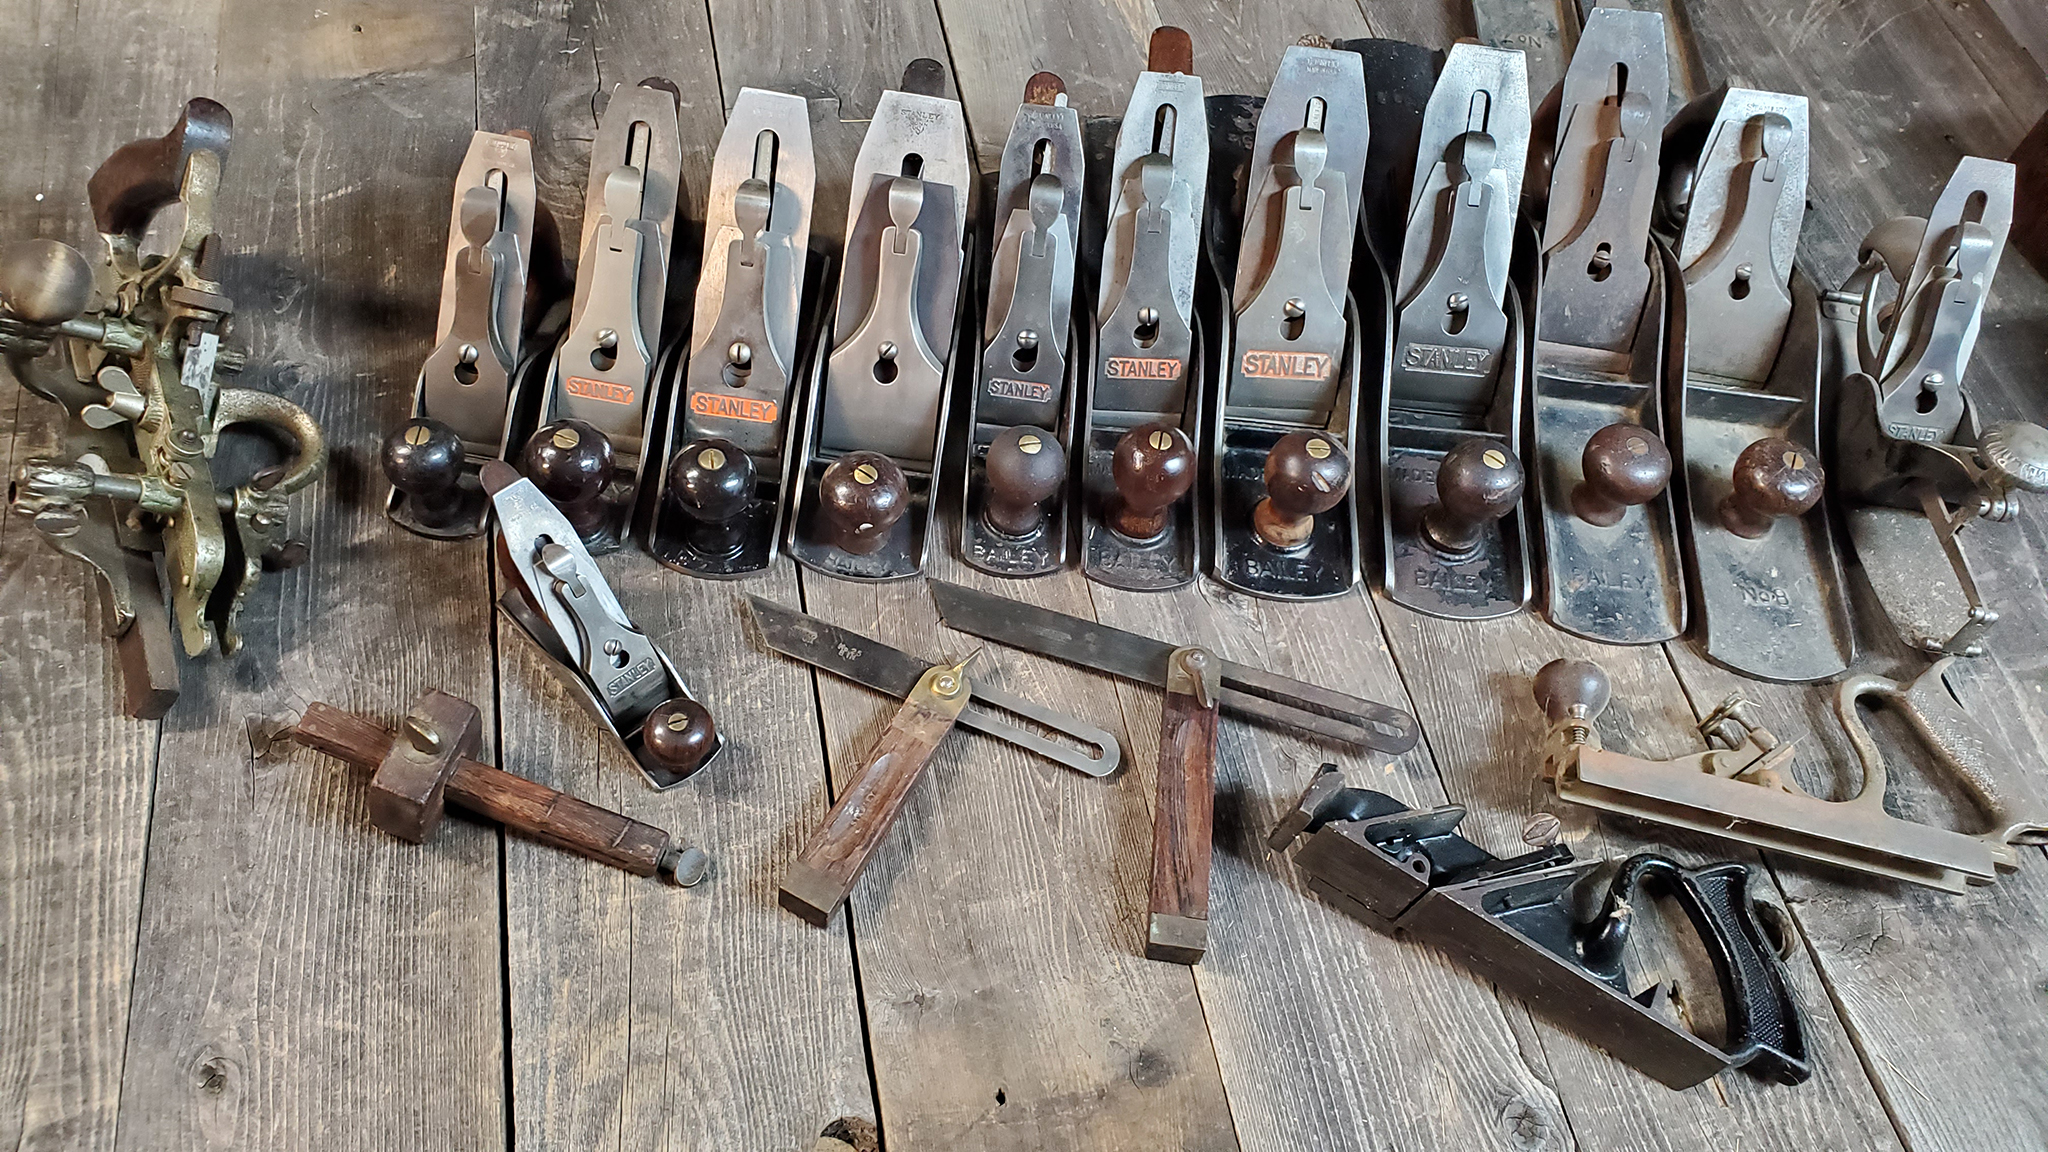 Selection of Stanley Planes and Tools